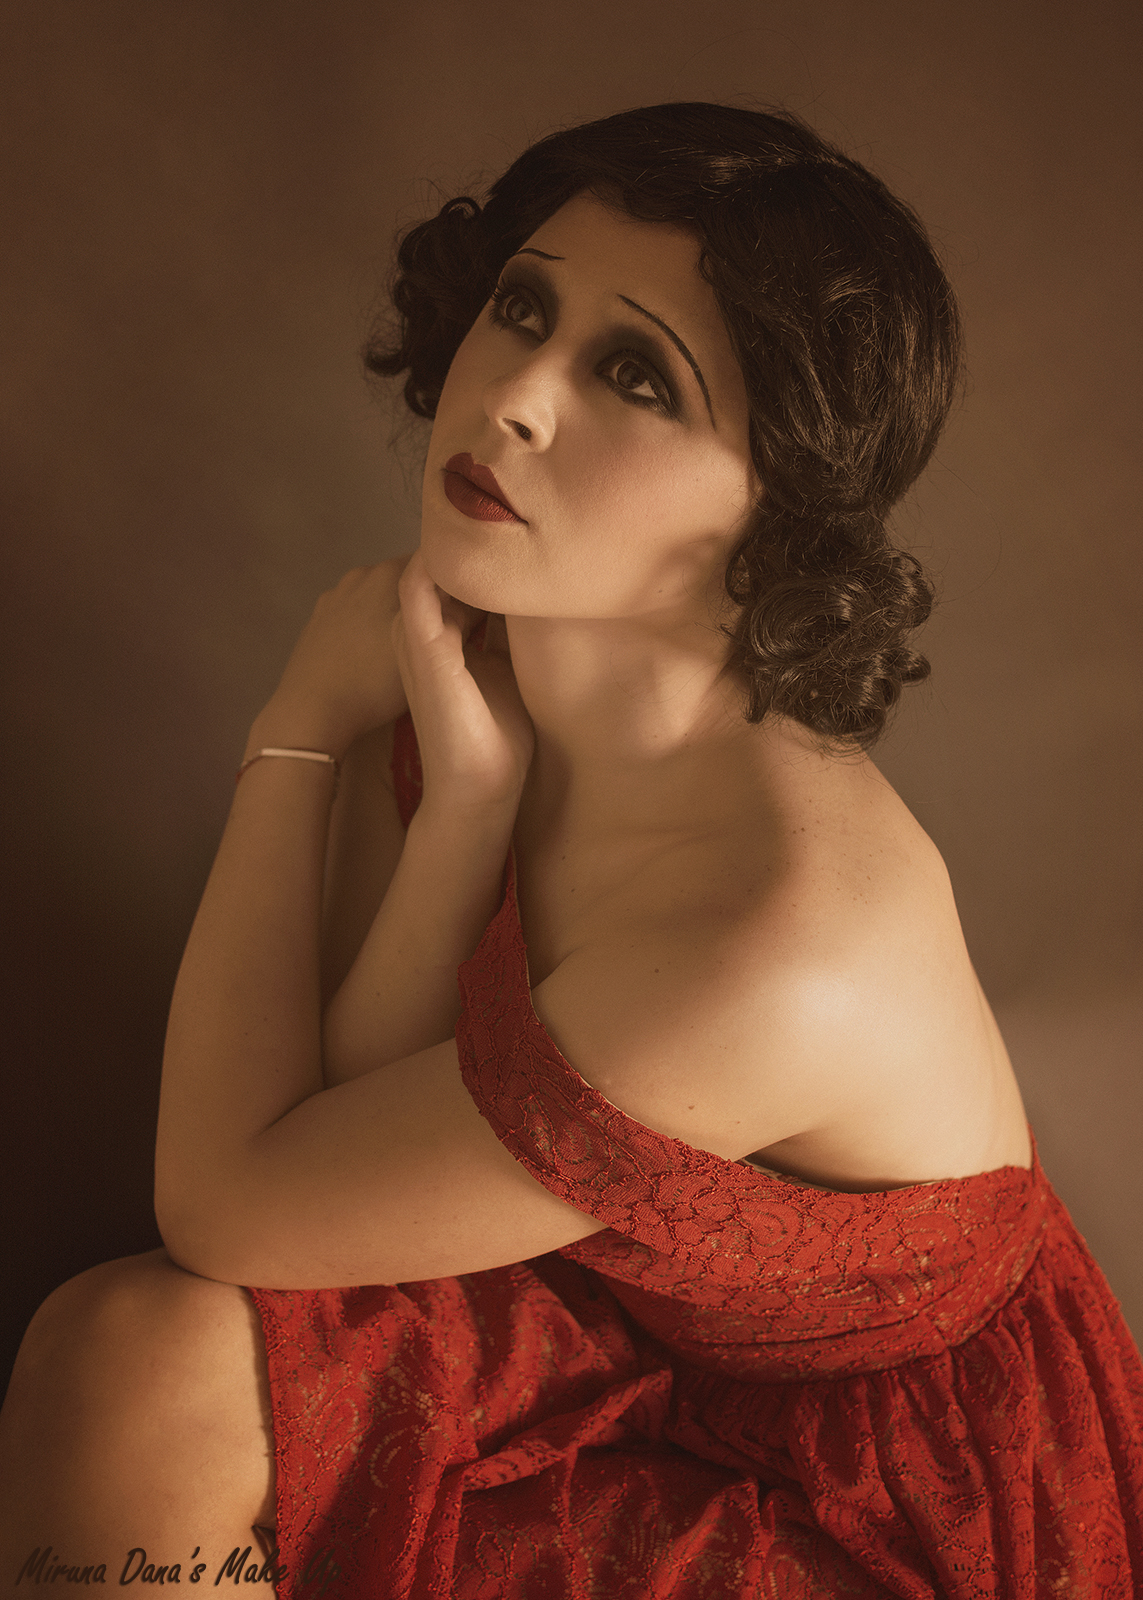 1920s Makeup Style